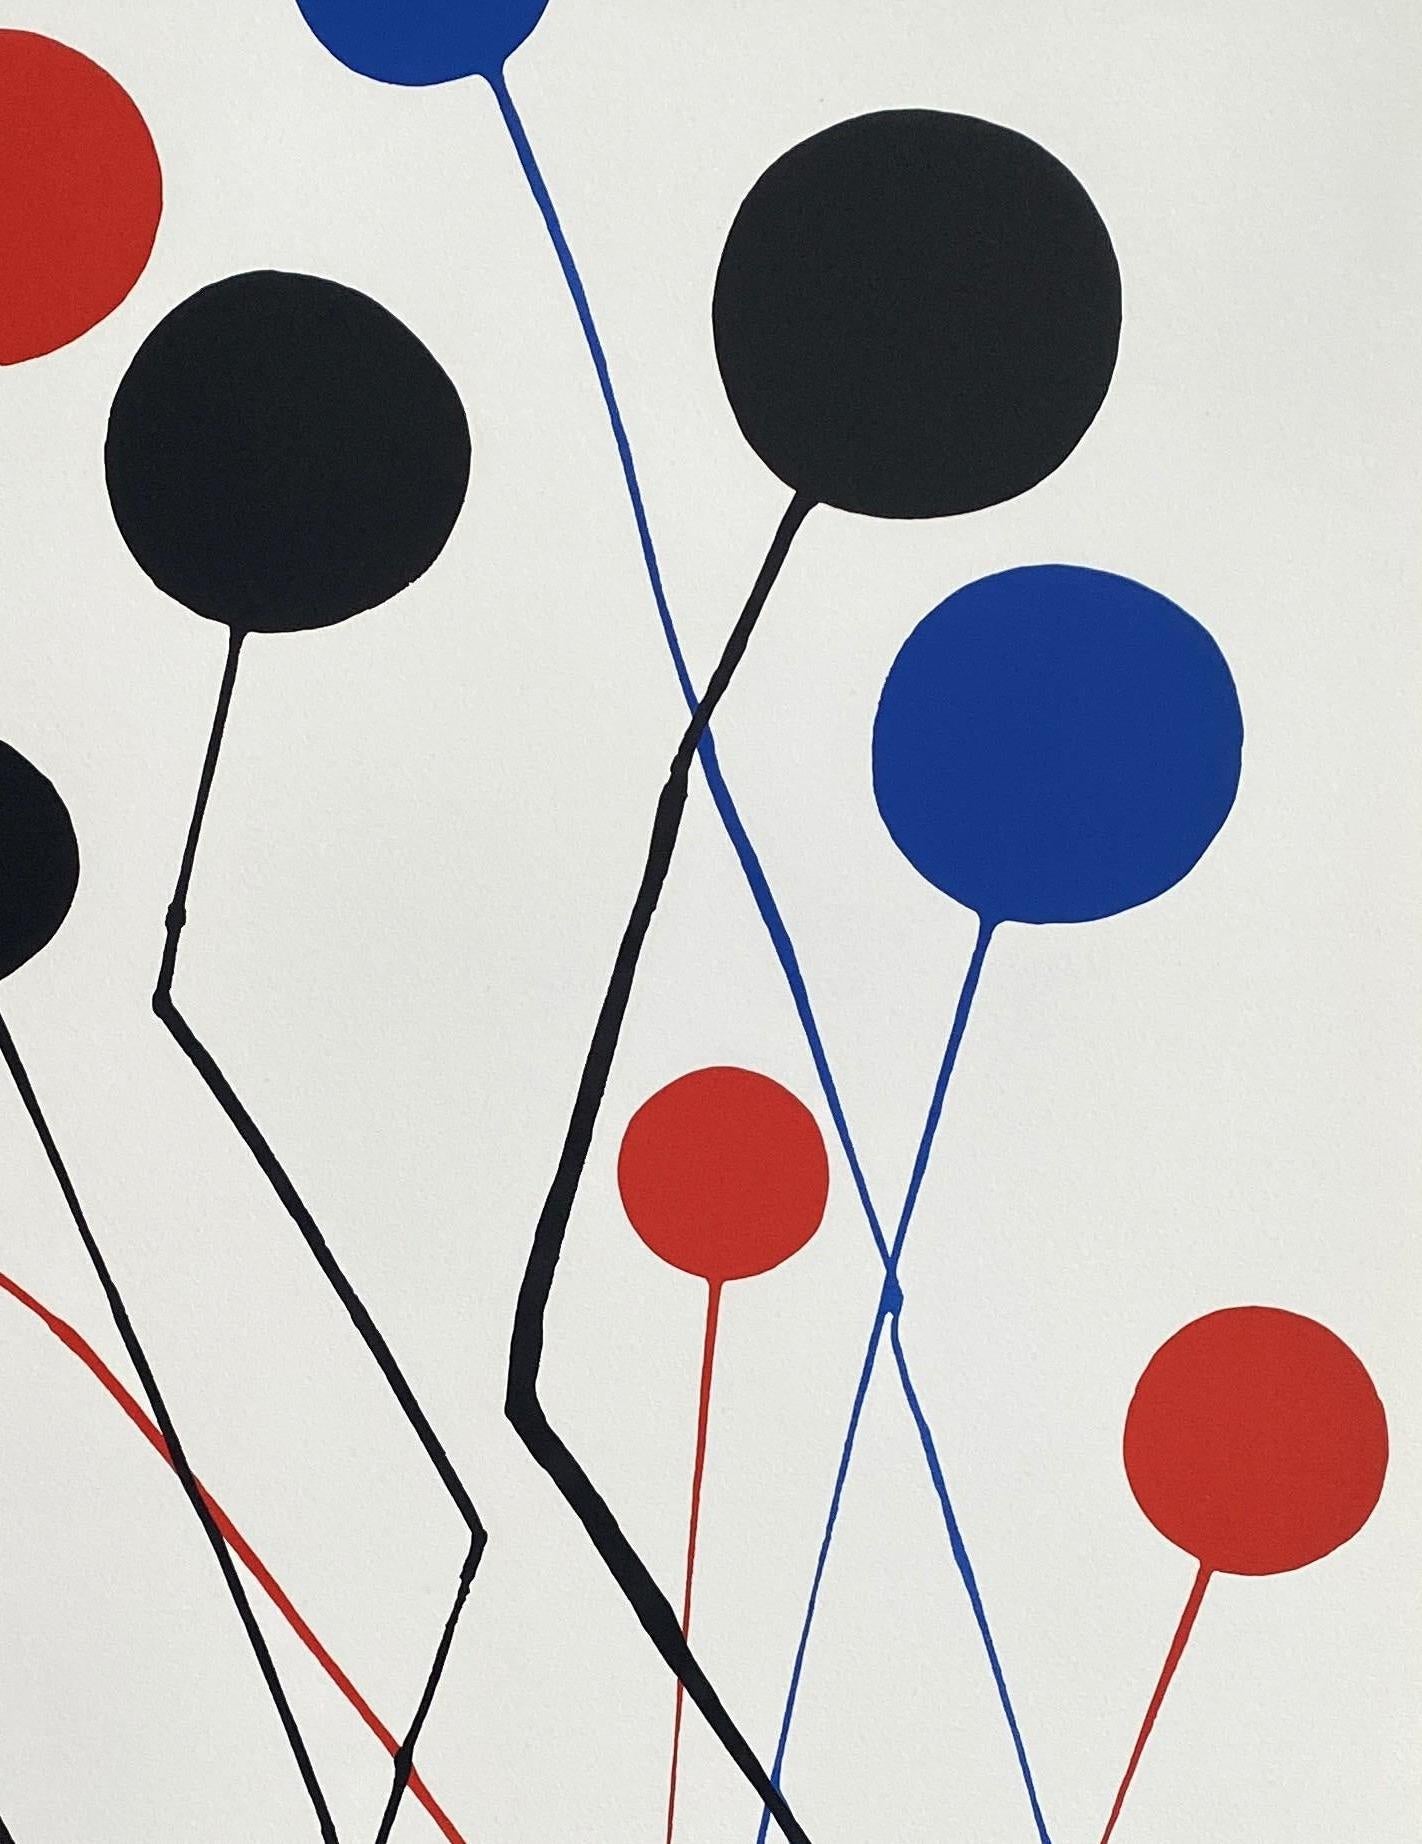 Red, Blue & Black Balloons - Original Lithograph Signed in the Plate - Abstract Print by Alexander Calder